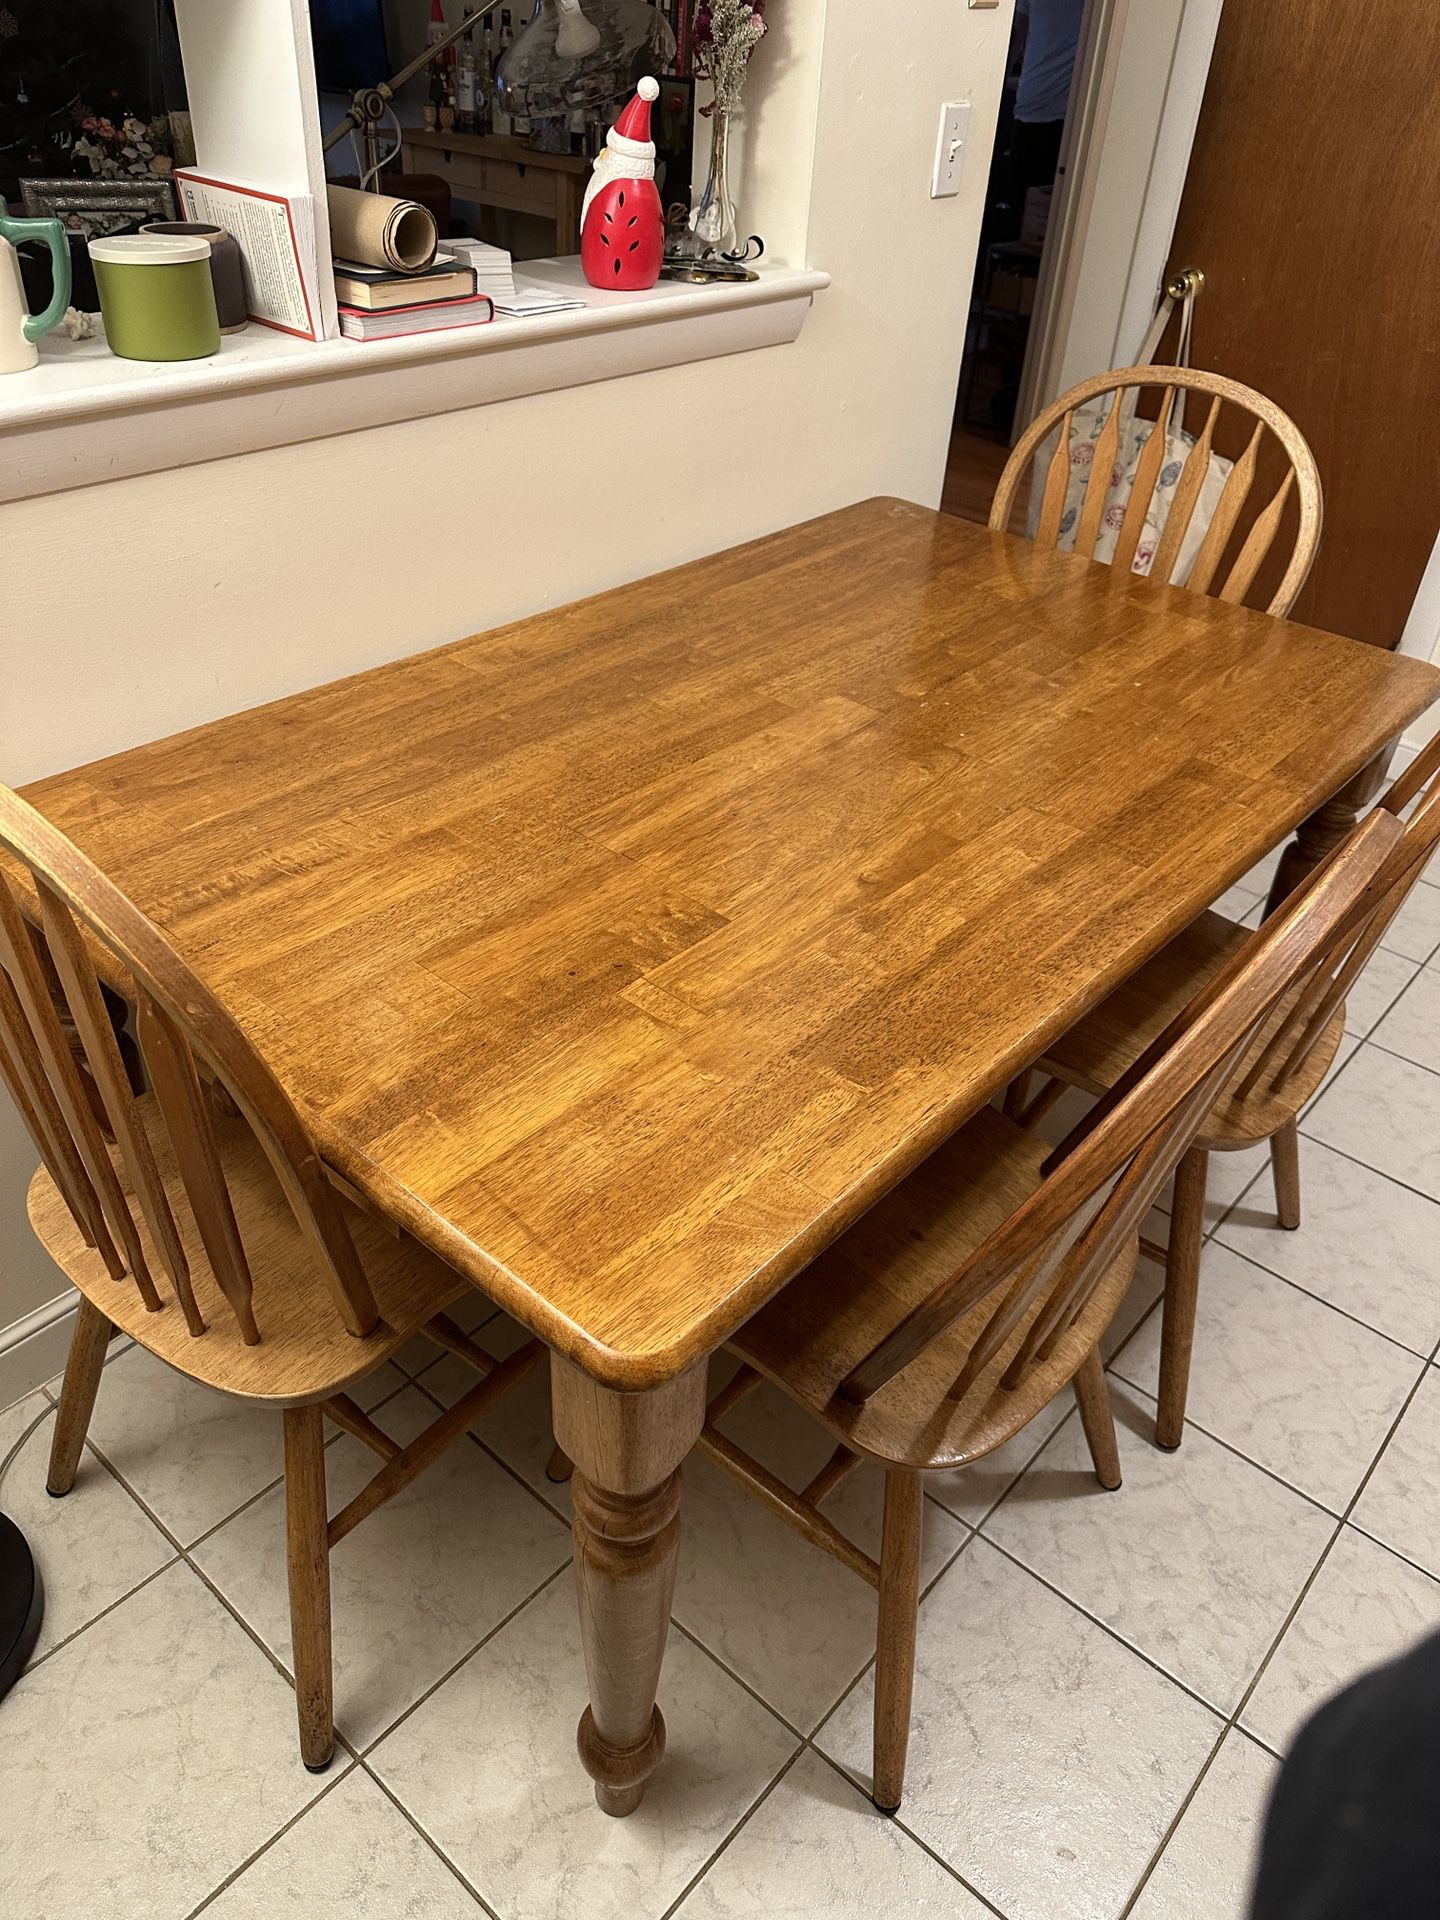 Wooden Dining Room Table With Chairs